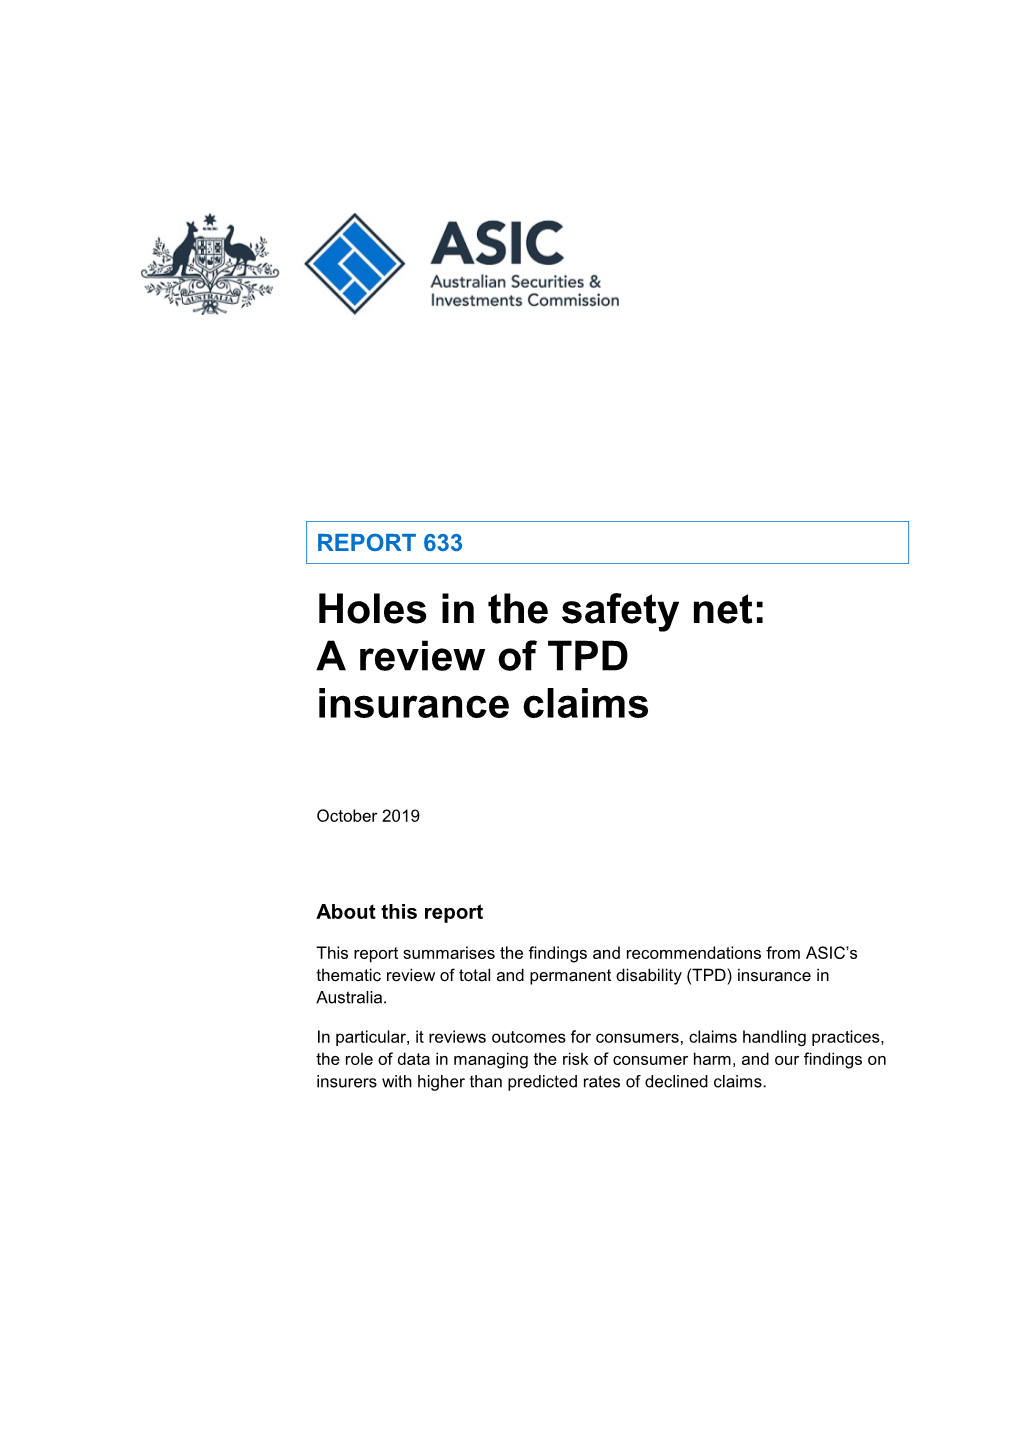 Report REP 633: Holes in the Safety Net: a Review of TPD Insurance Claims